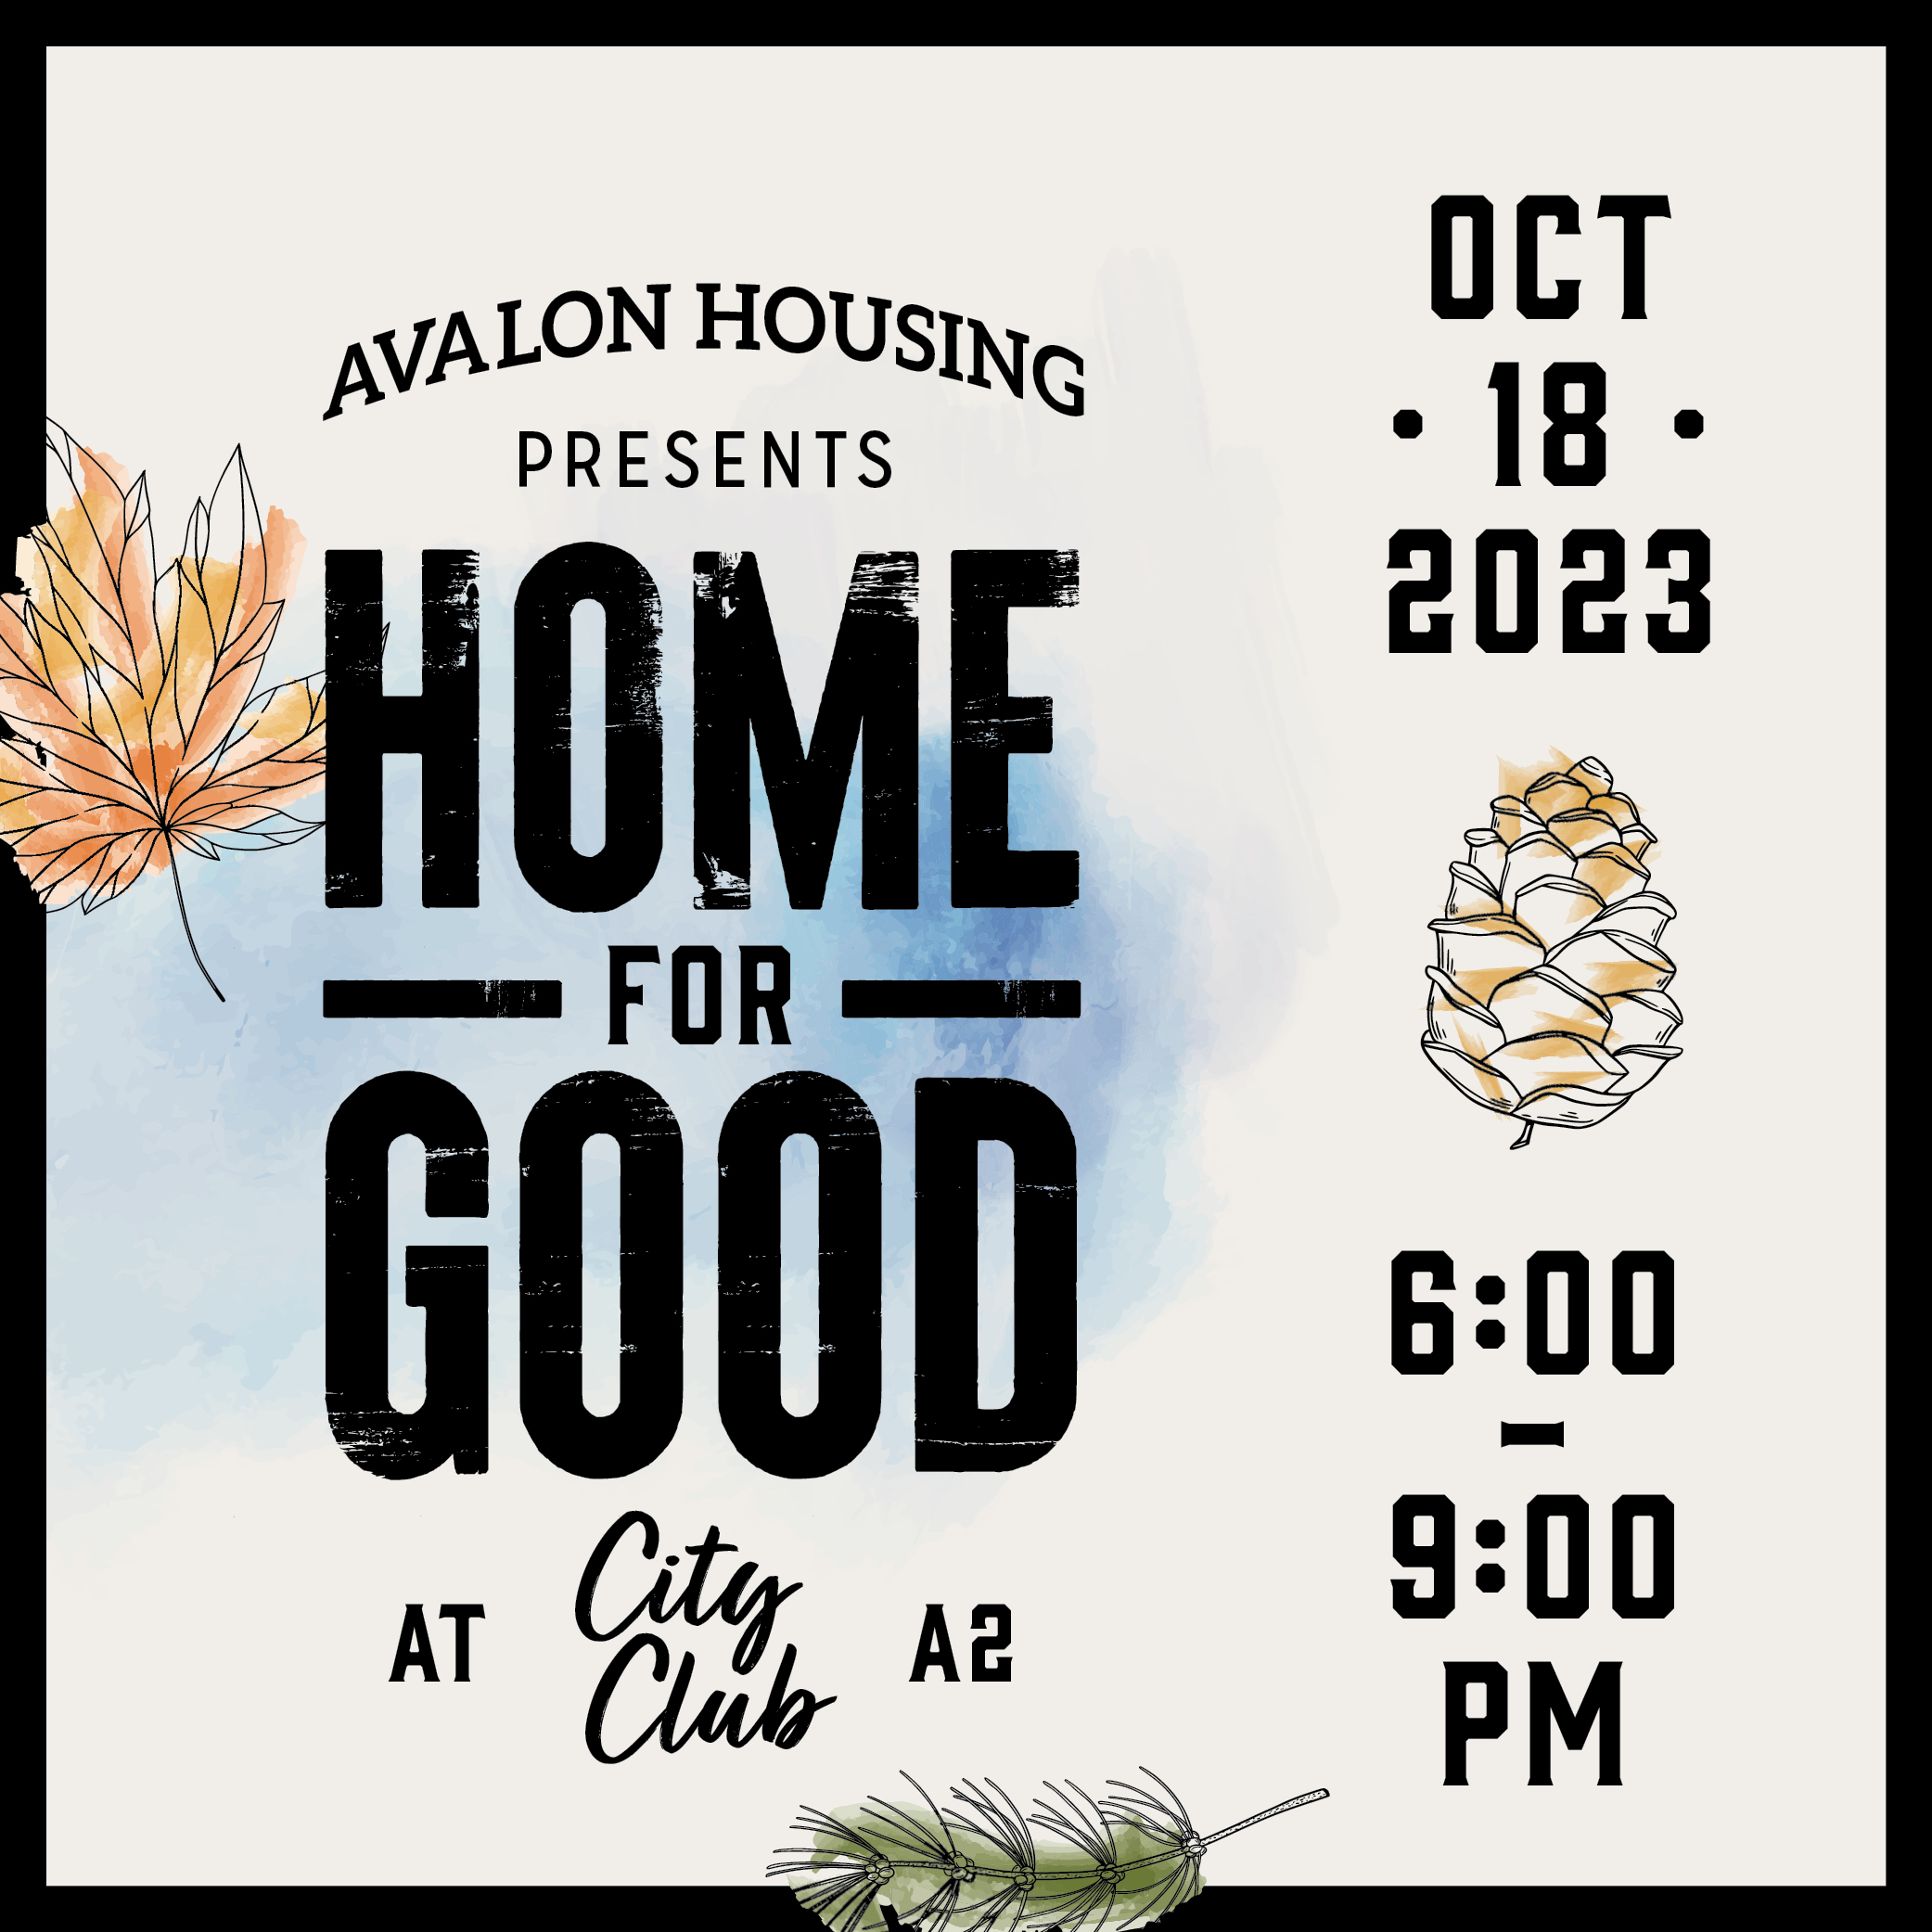 Home for Good event banner with a white background and black trim surrounding it, a splash of light blue watercolor behind the words "Home for Good", plus drawings of a tree leaf, a pinecone and a green pine bough.